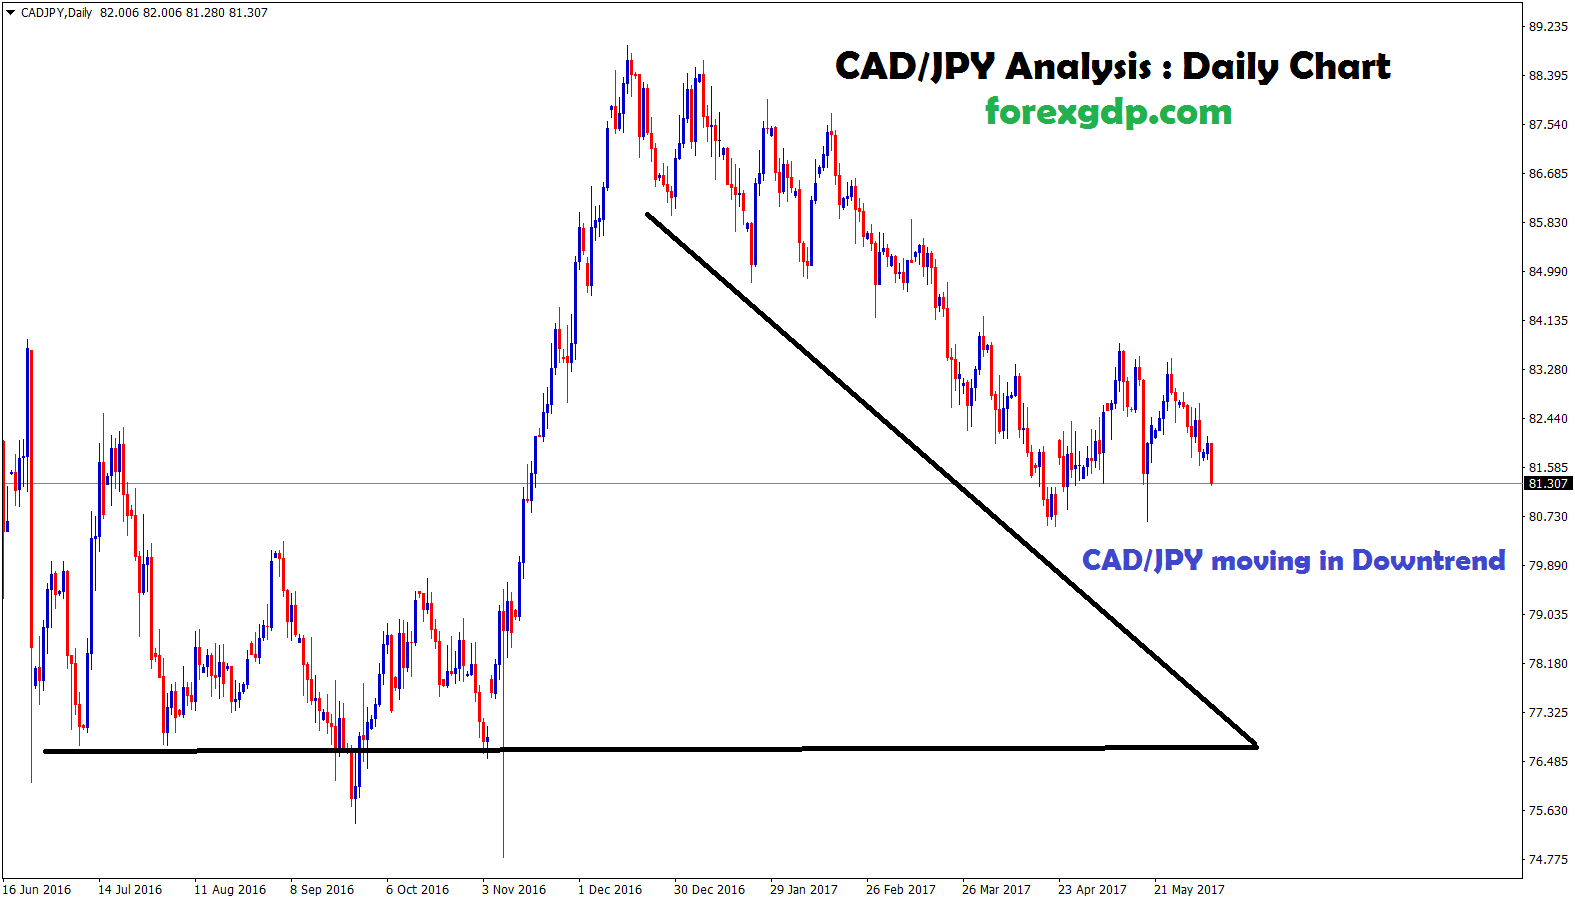 Downtrend movement in CADJPY daily chart